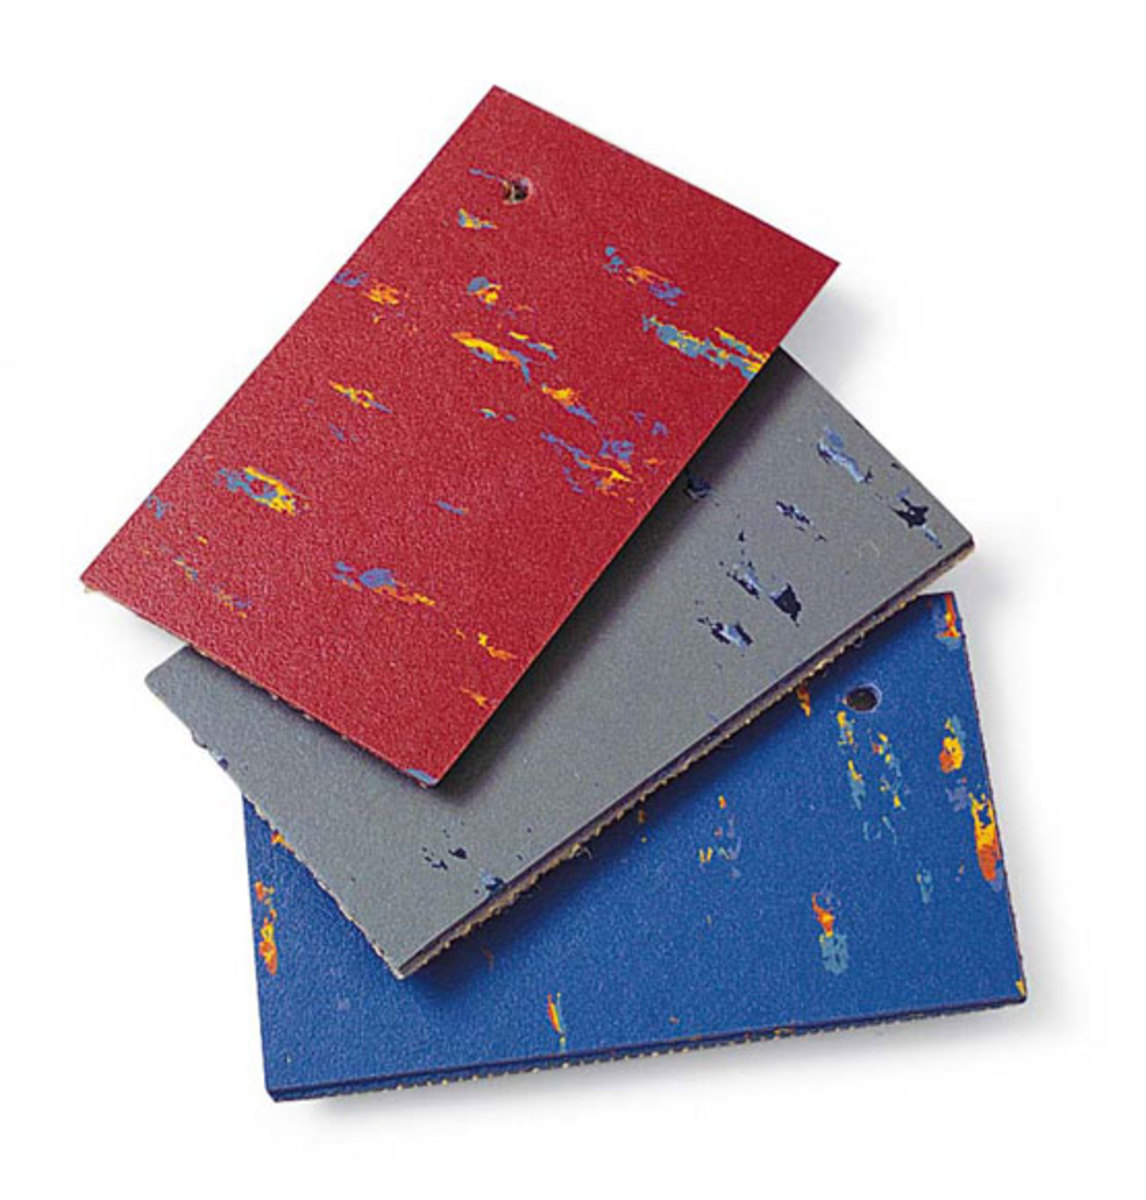 Linoleum and commercial vinyl are available in vibrant, period-friendly colors. Courtesy Linoleum City.